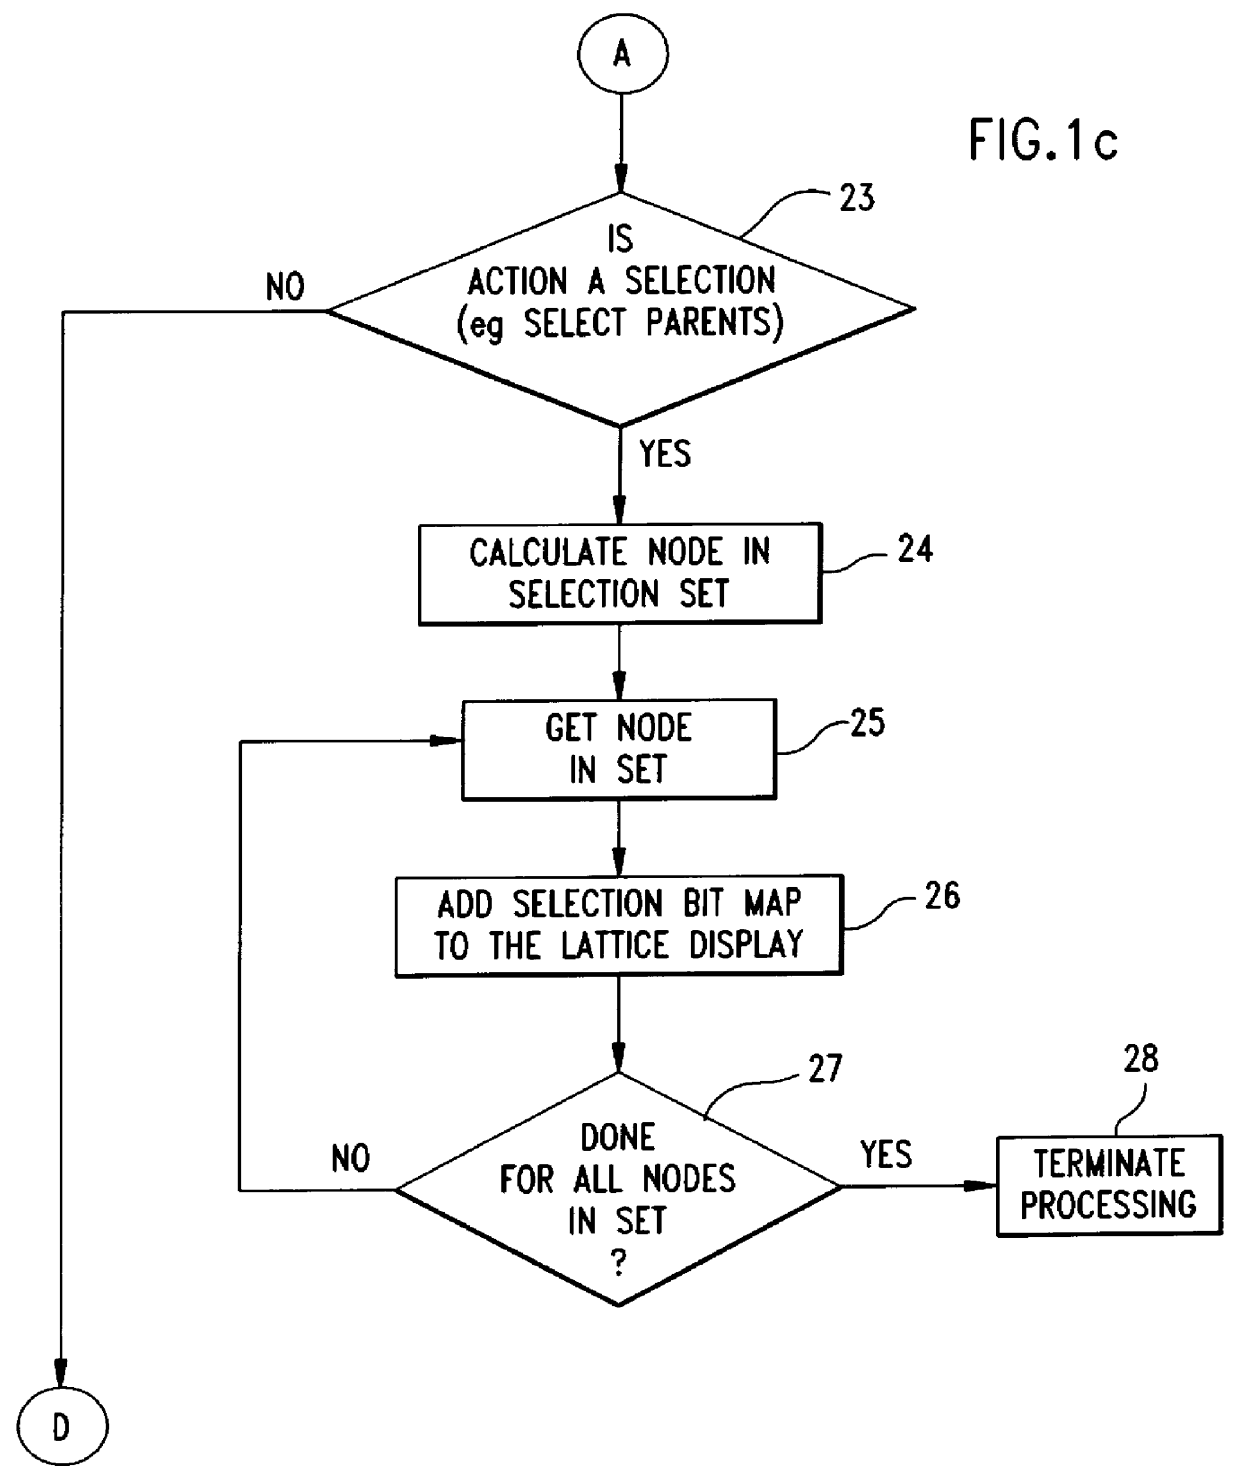 Enhanced tree control system for navigating lattices data structures and displaying configurable lattice-node labels